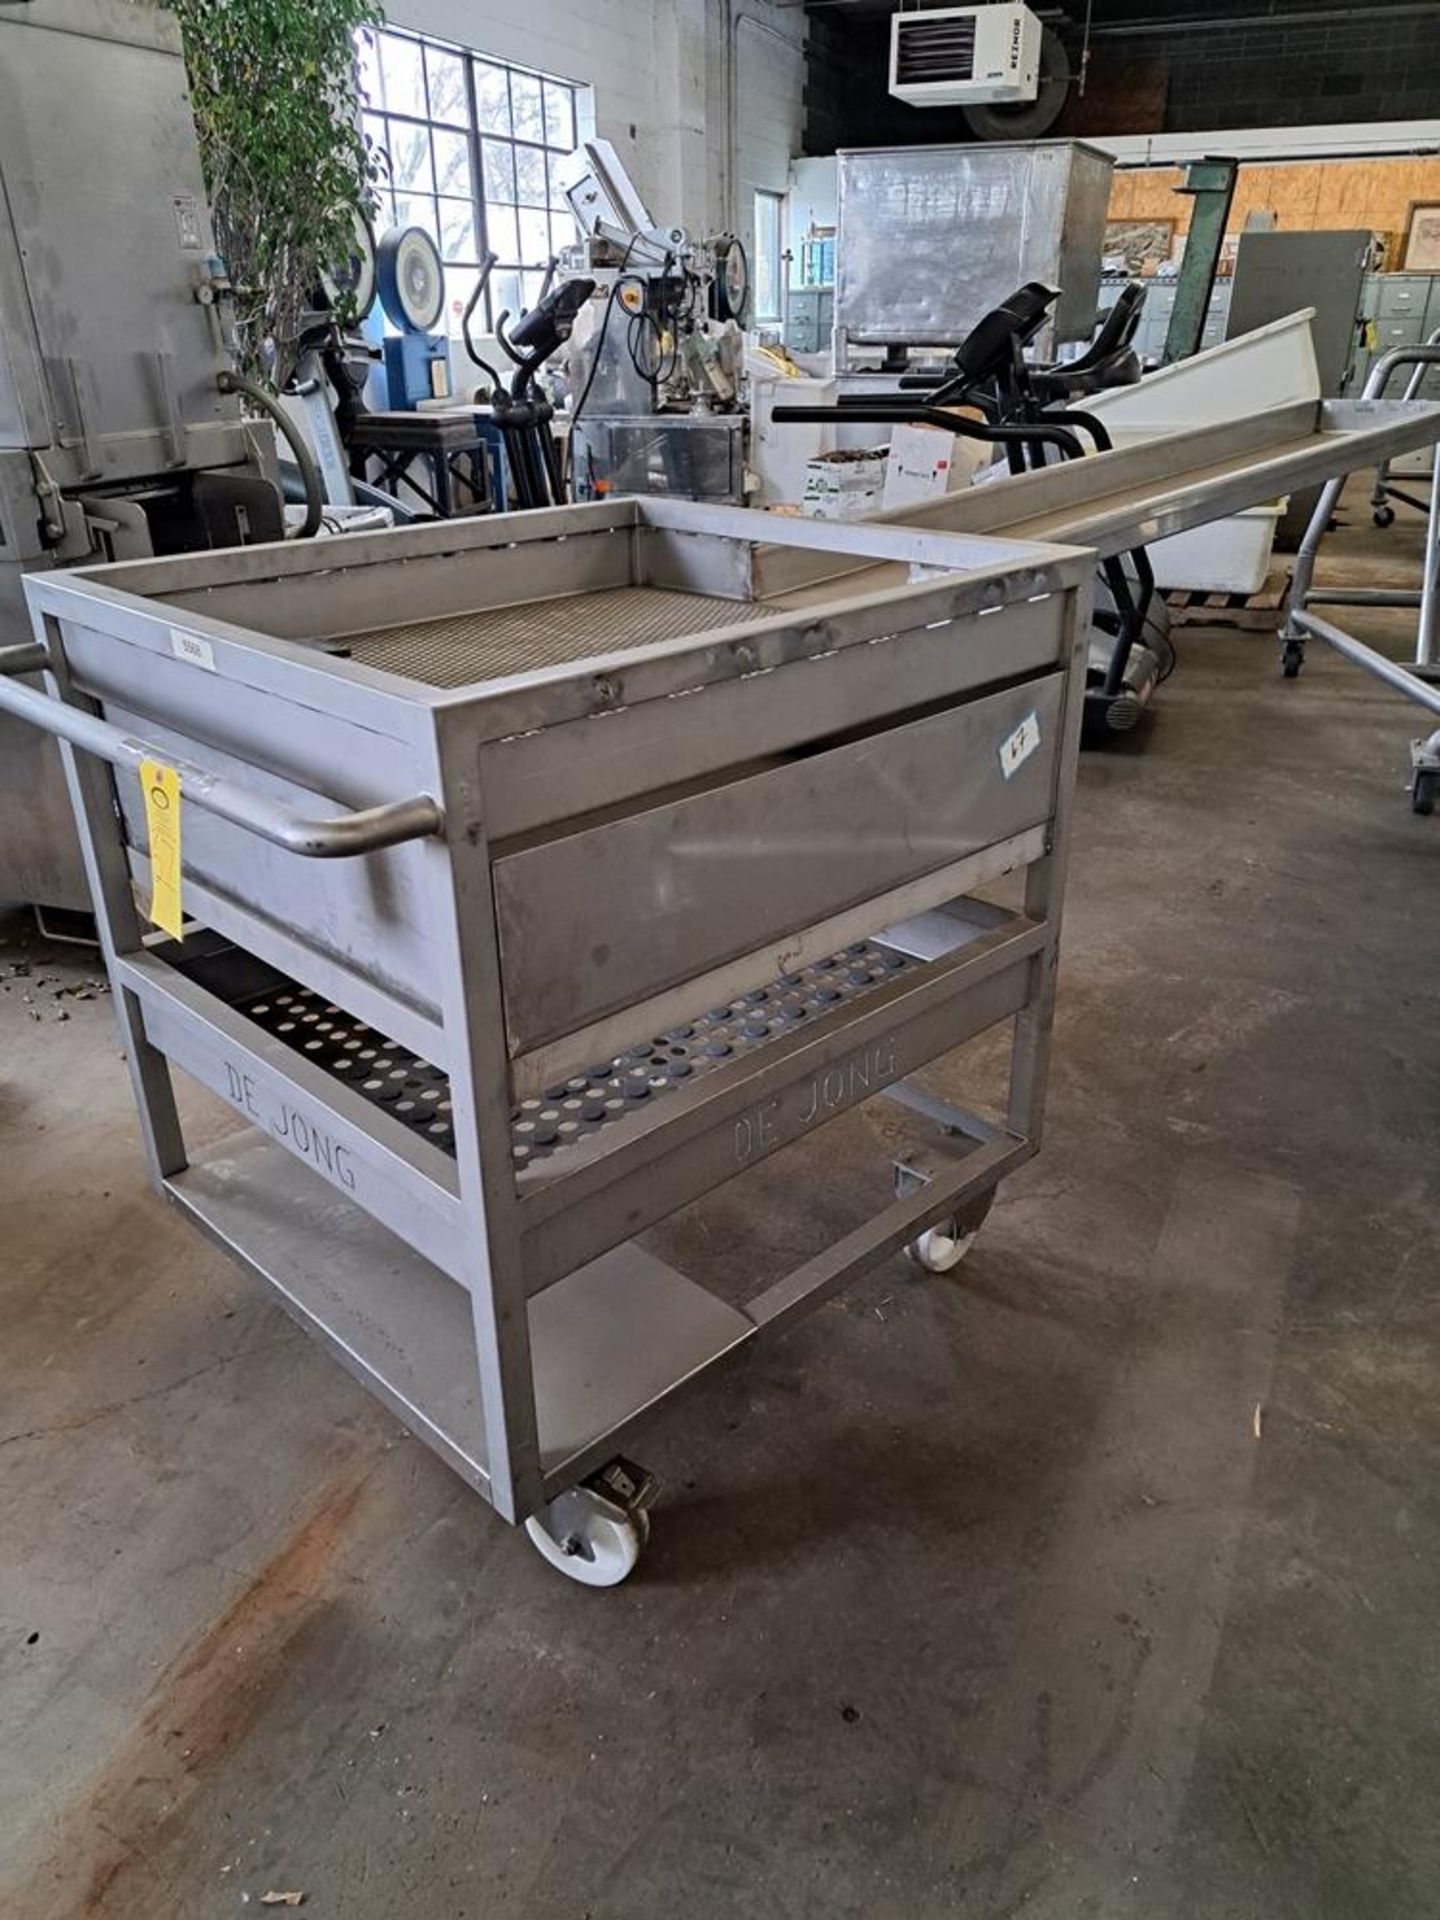 DeJong Portable Stainless Steel Product Sorting Trough, 31" wide X 36" long X 5" deep, perforated - Image 5 of 5